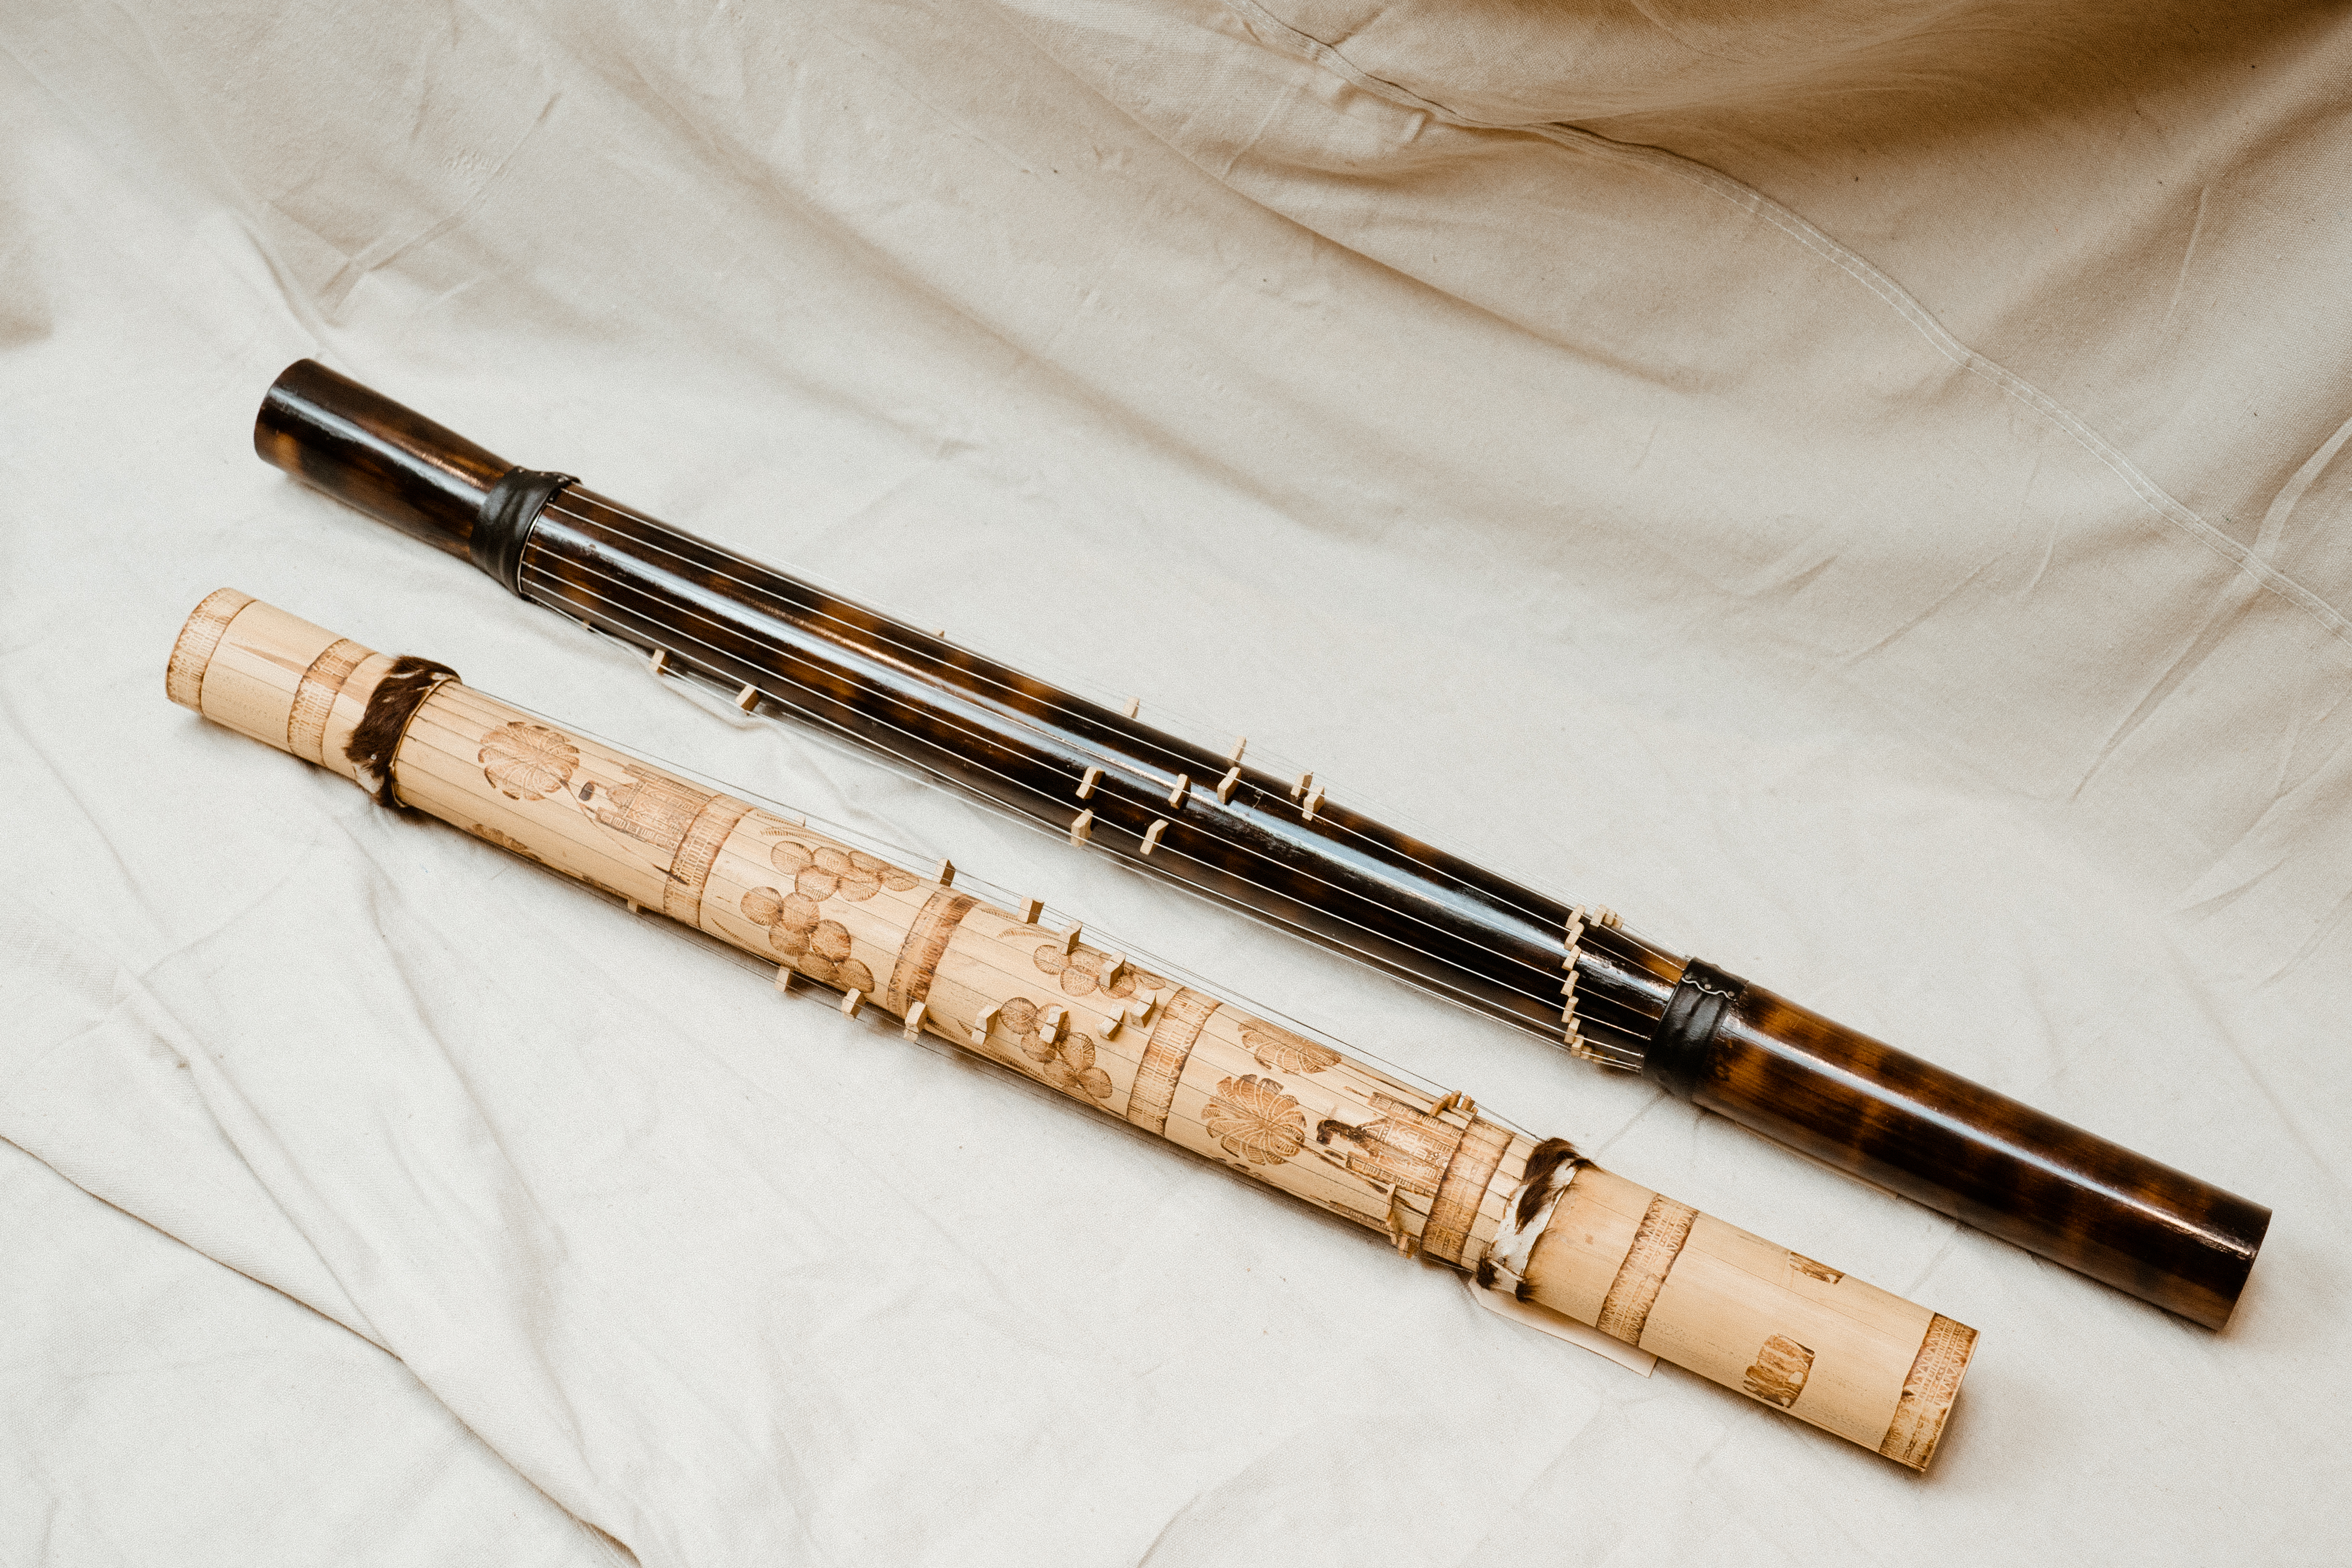 Botanical Resonance: Learn More About Madagascar Instruments